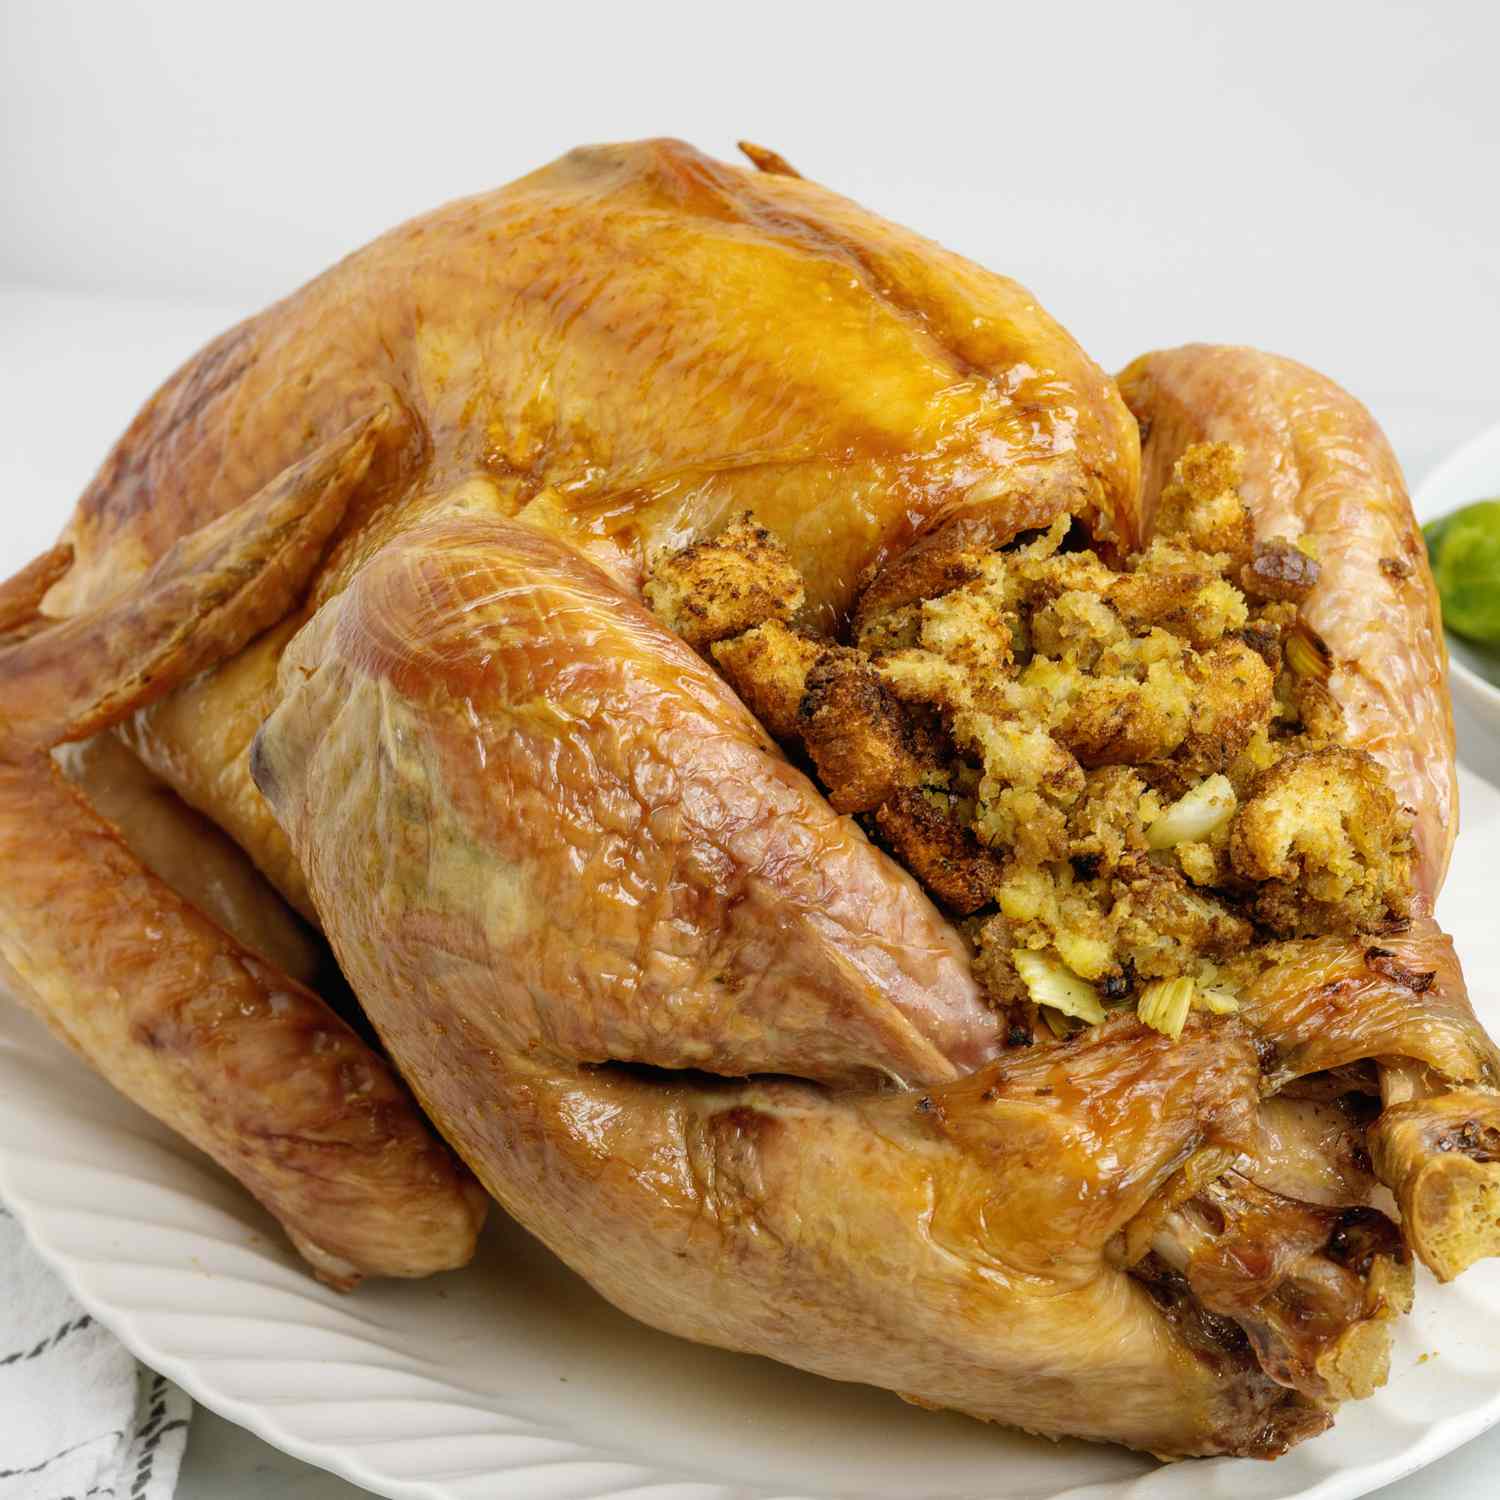 a mid level view of a golden brown turkey on a white oval platter, filled with traditional stuffing.